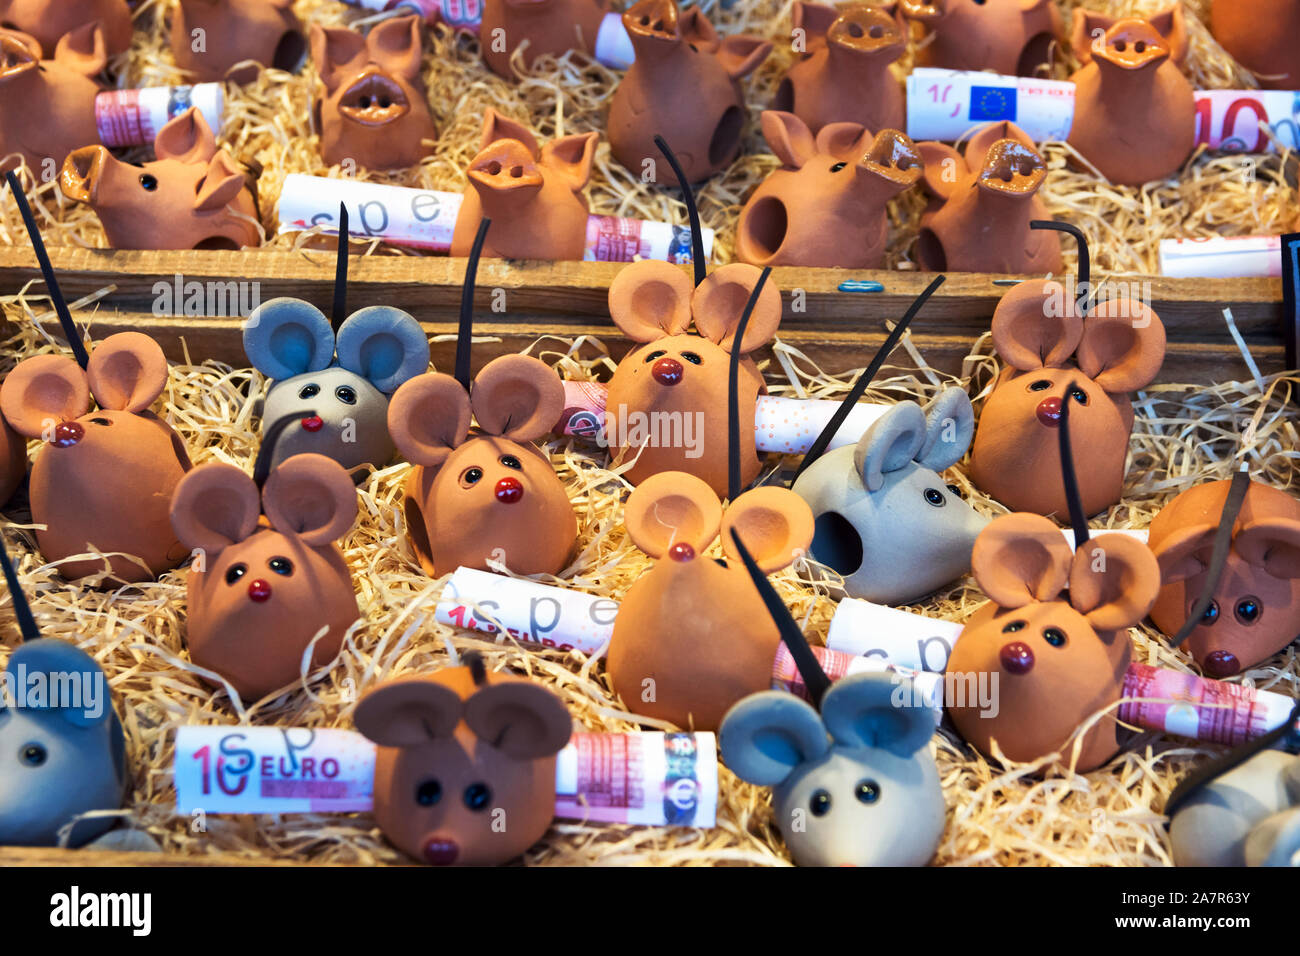 Austria-Linz - December 6, 2018: Hand crafted artisan clay figures of rats mice with euro banknotes for sale at Christmas market Christkindlmarkt in E Stock Photo